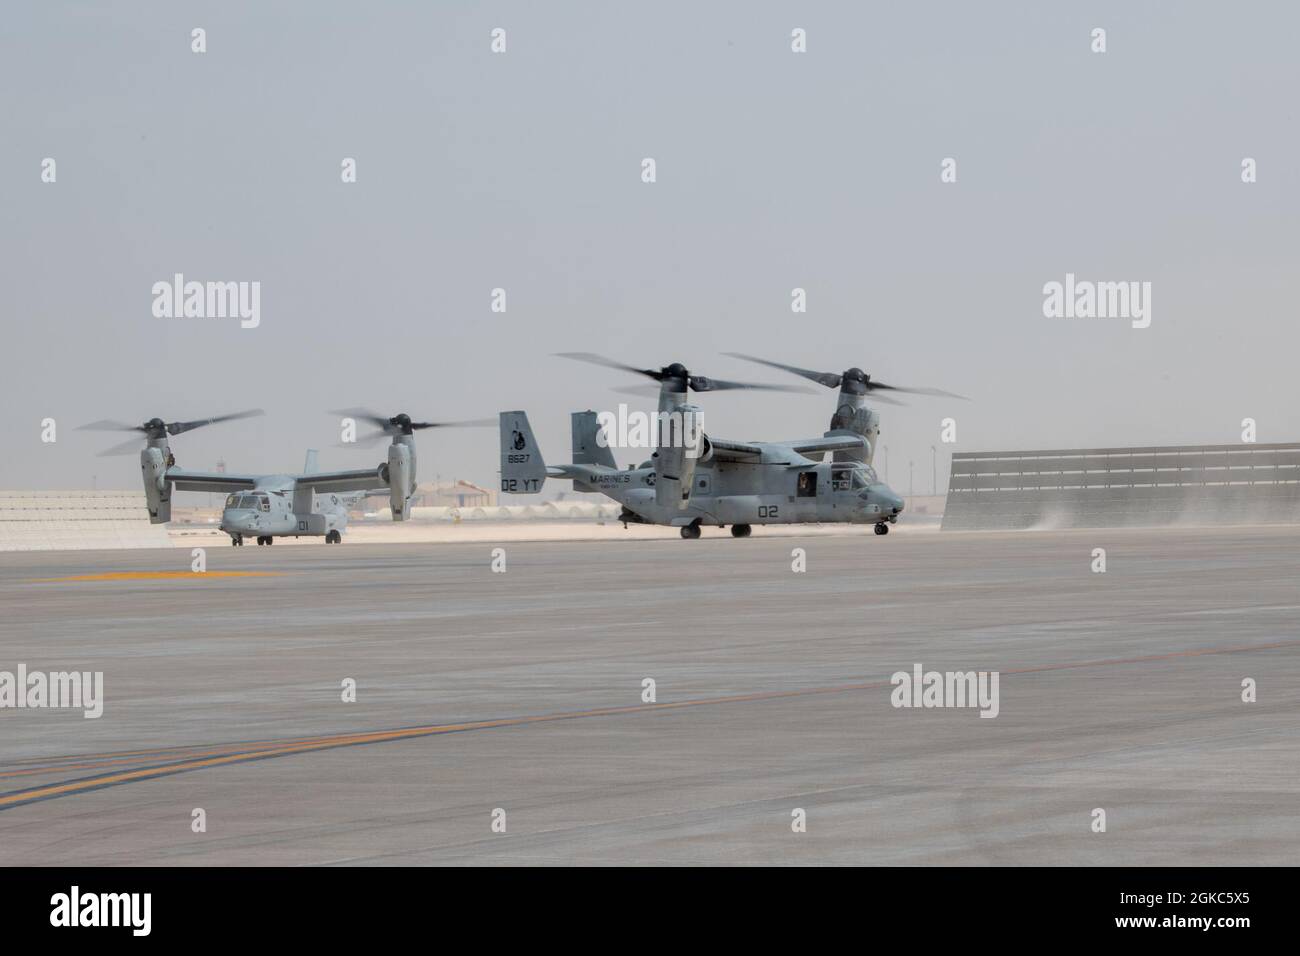 Two U.S. Marine Corps MV-22 Osprey aircraft, attached to Marine Medium Tiltrotor Squadron 164 (Reinforced), 15th Marine Expeditionary Unit, land for refueling operations at Al Udeid Air Base, Qatar, March 2, 2021. The 15th MEU is one of many joint partners in U.S. Central Command’s area of responsibility ensuring regional stability and protection of United States assets and coalition partners.  The MV-22 Osprey participated in the Air Forces Central Agile Combat Employment capstone event. The capstone event enhanced theater ACE competencies, validating operational capabilities and command and Stock Photo